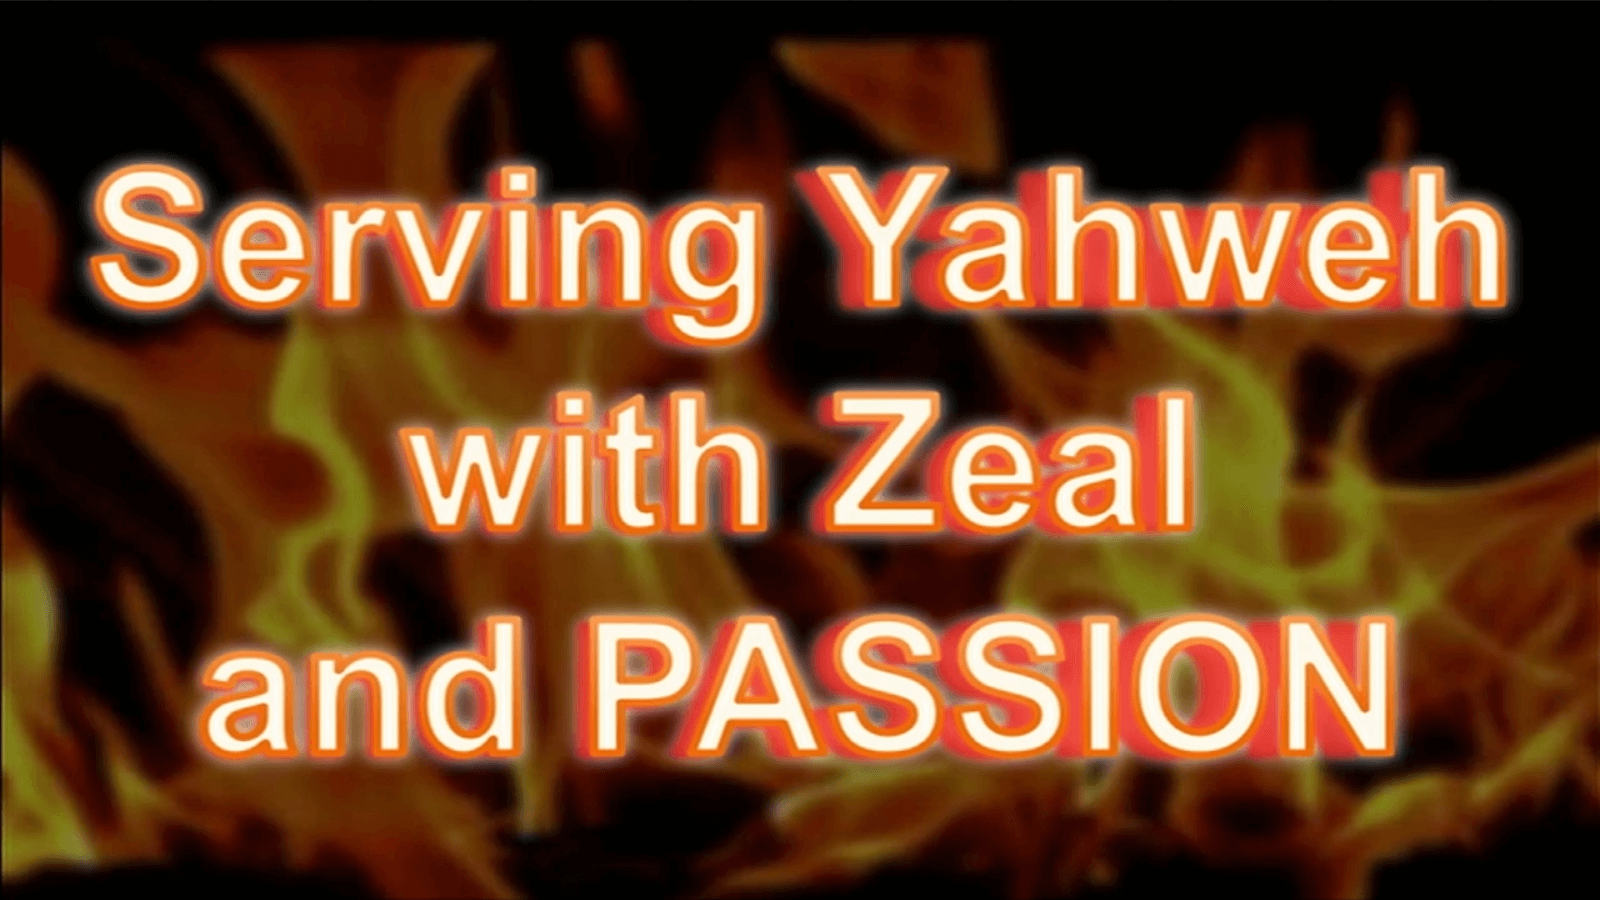 Serving Yahweh with Zeal and Passion